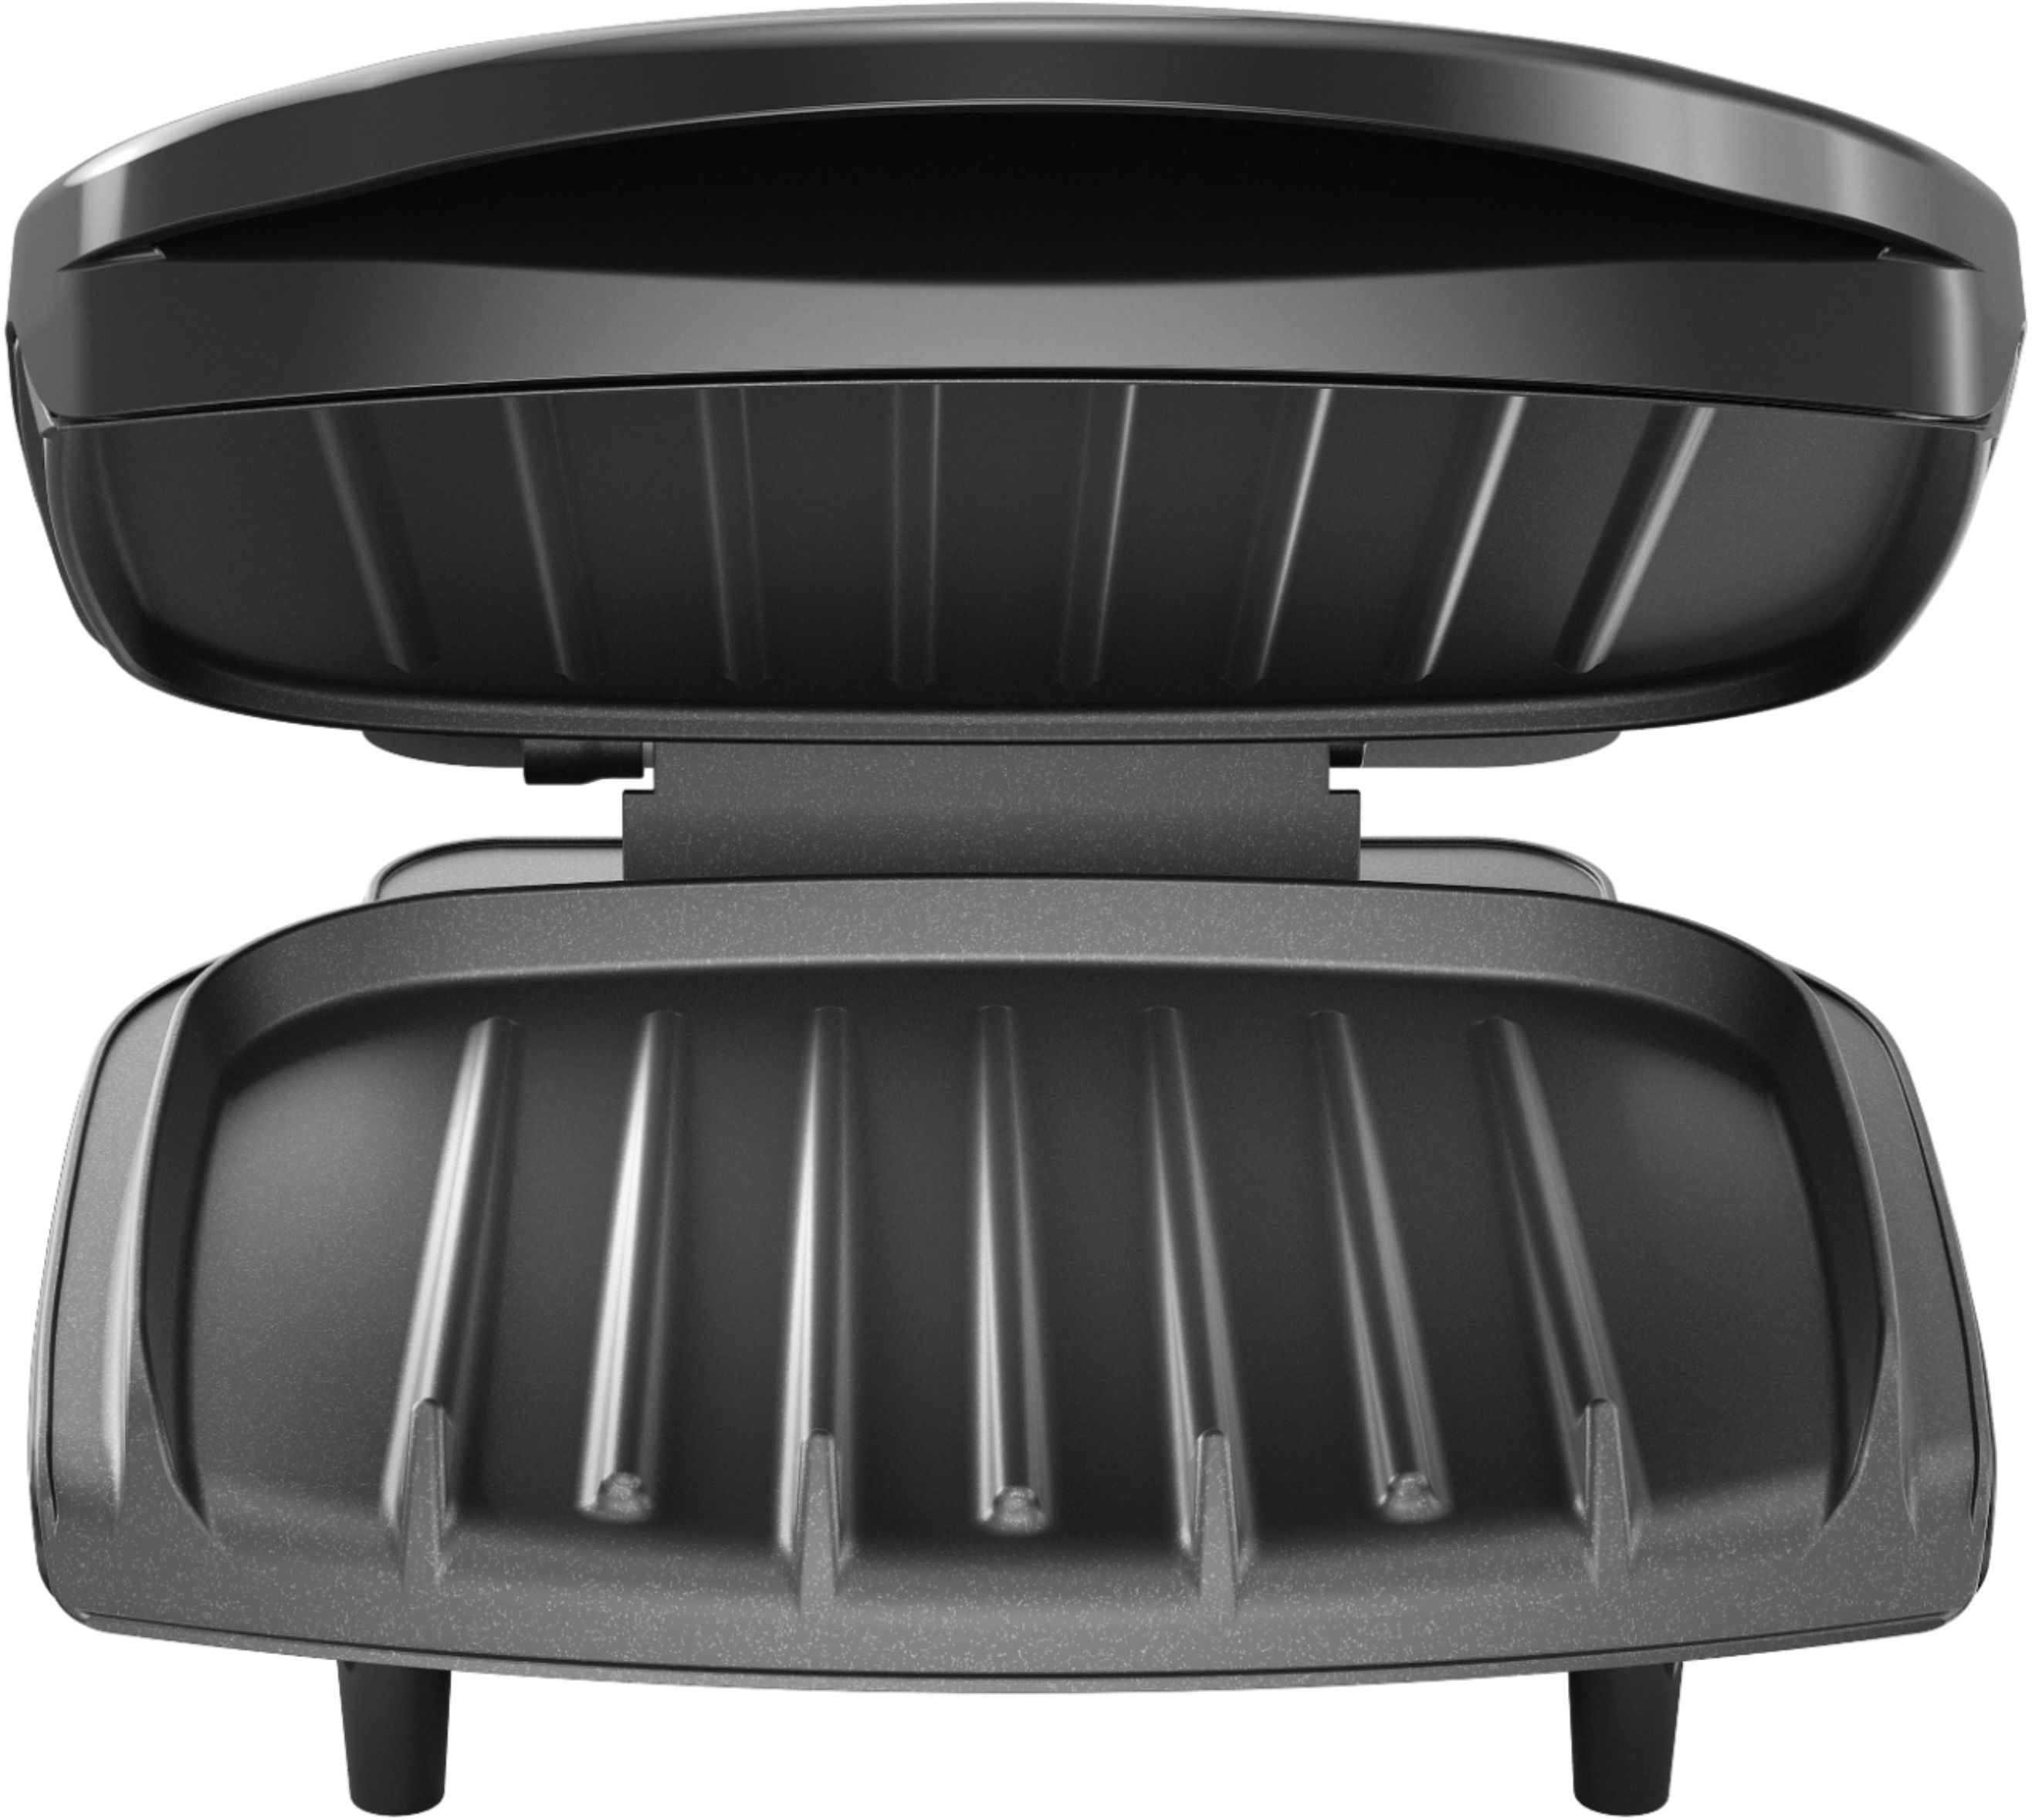 George Foreman, Kitchen, George Foreman Grill The Champ Grill 2 Serving  Grill